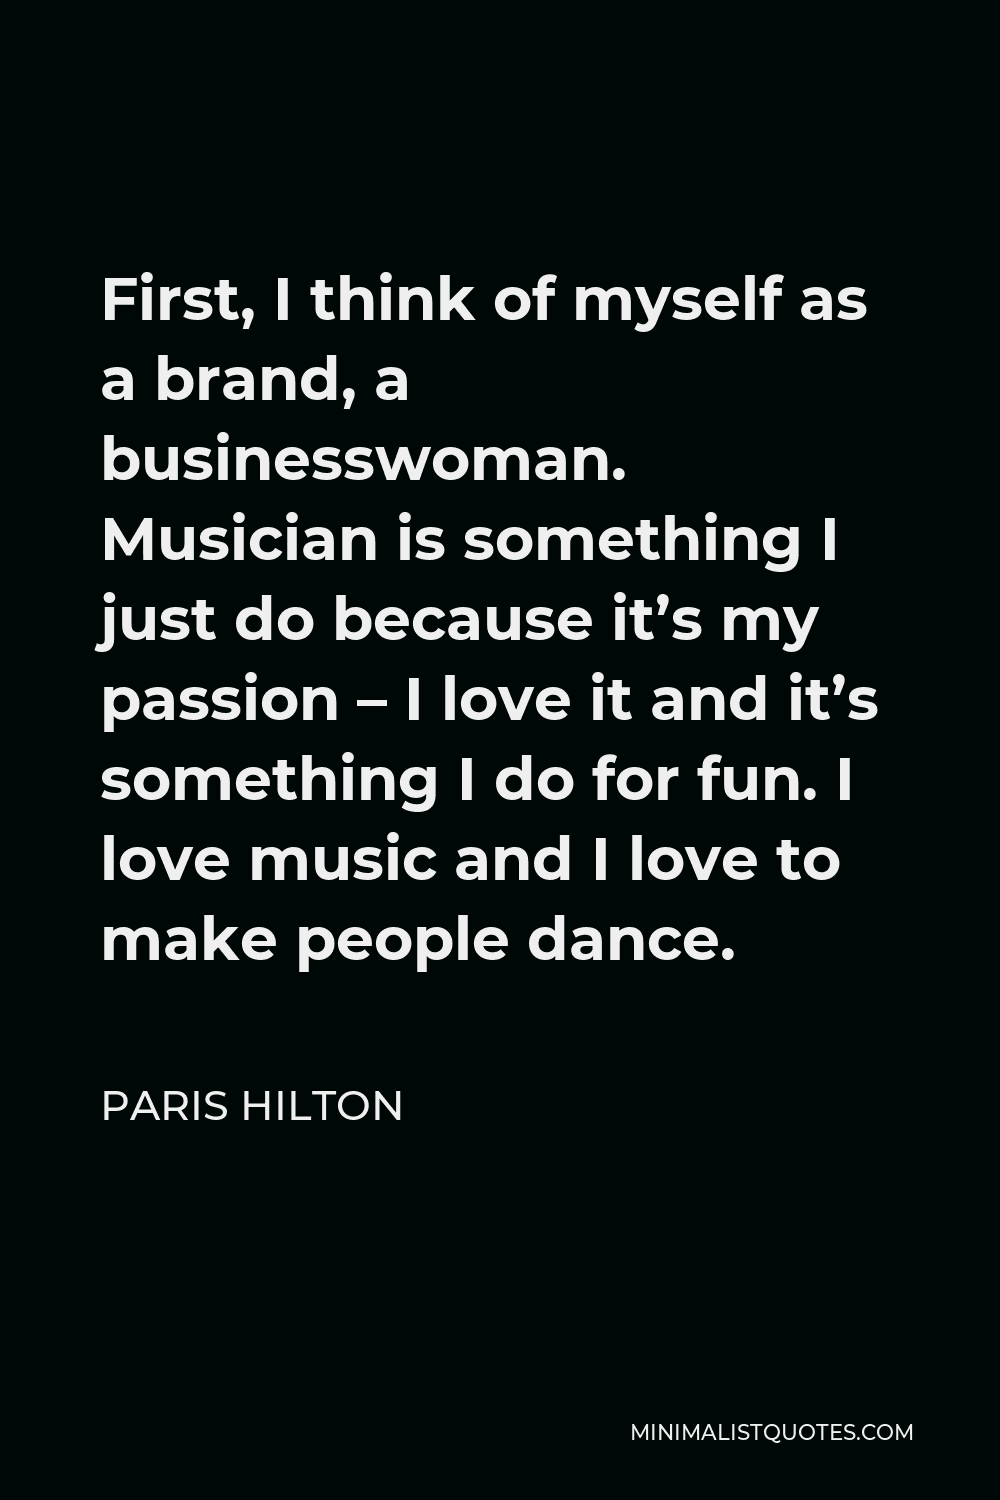 Paris Hilton Quote - First, I think of myself as a brand, a businesswoman. Musician is something I just do because it’s my passion – I love it and it’s something I do for fun. I love music and I love to make people dance.